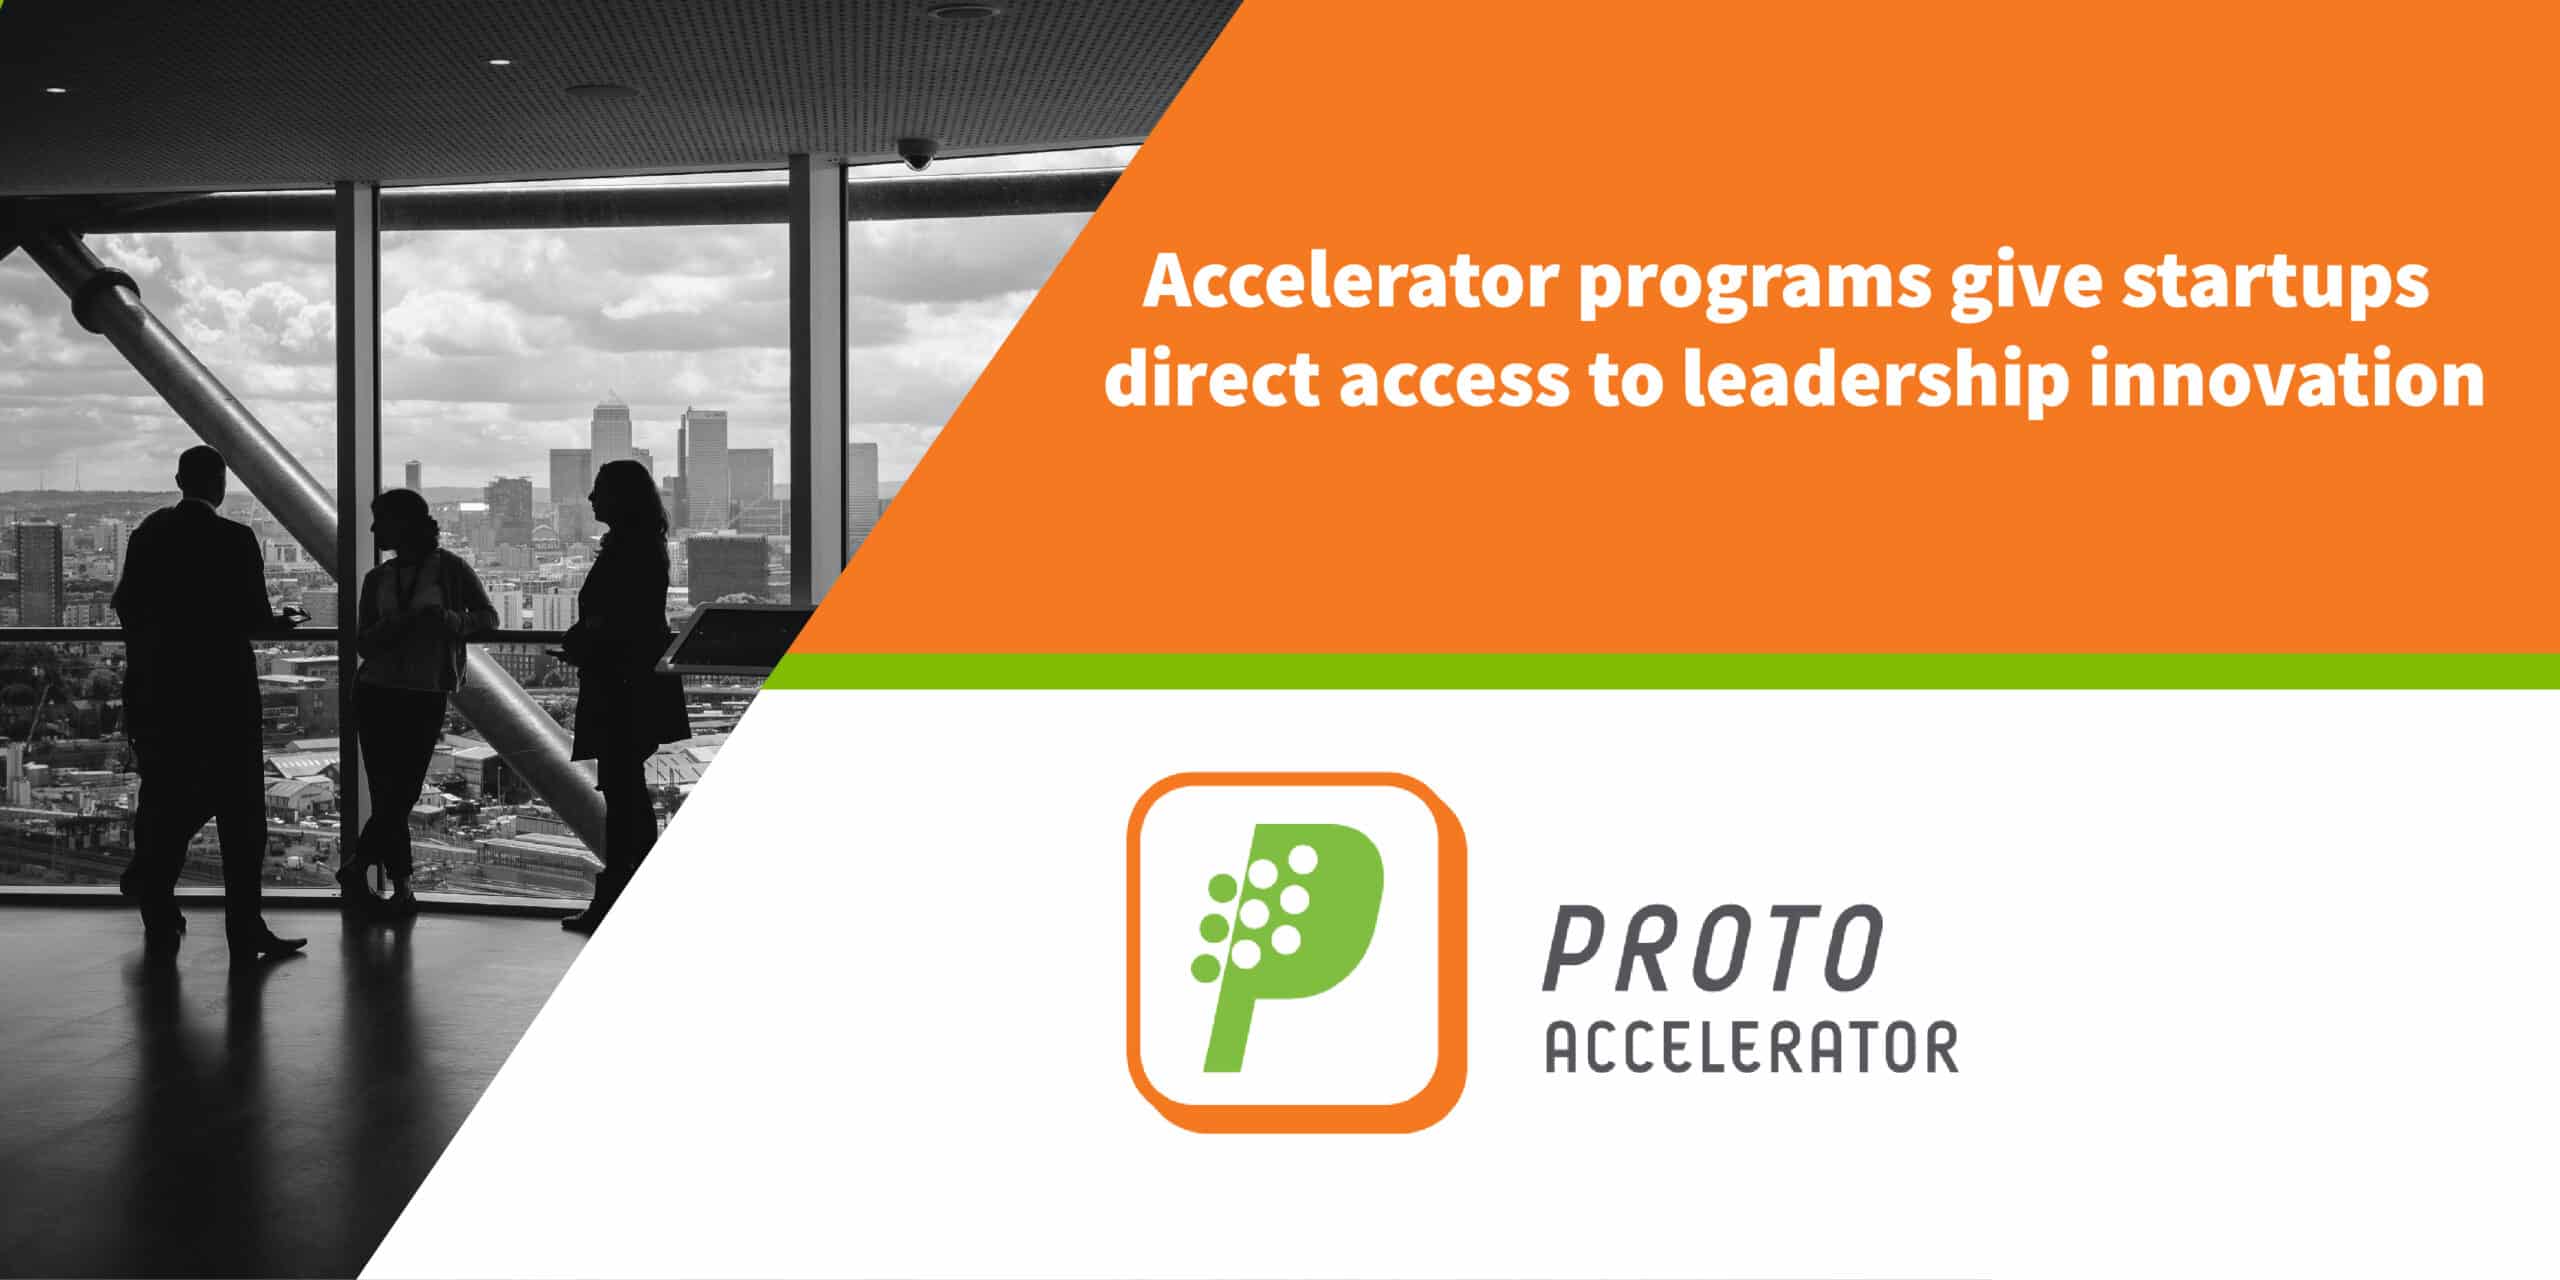 Accelerator programs give startups direct access to leadership innovation